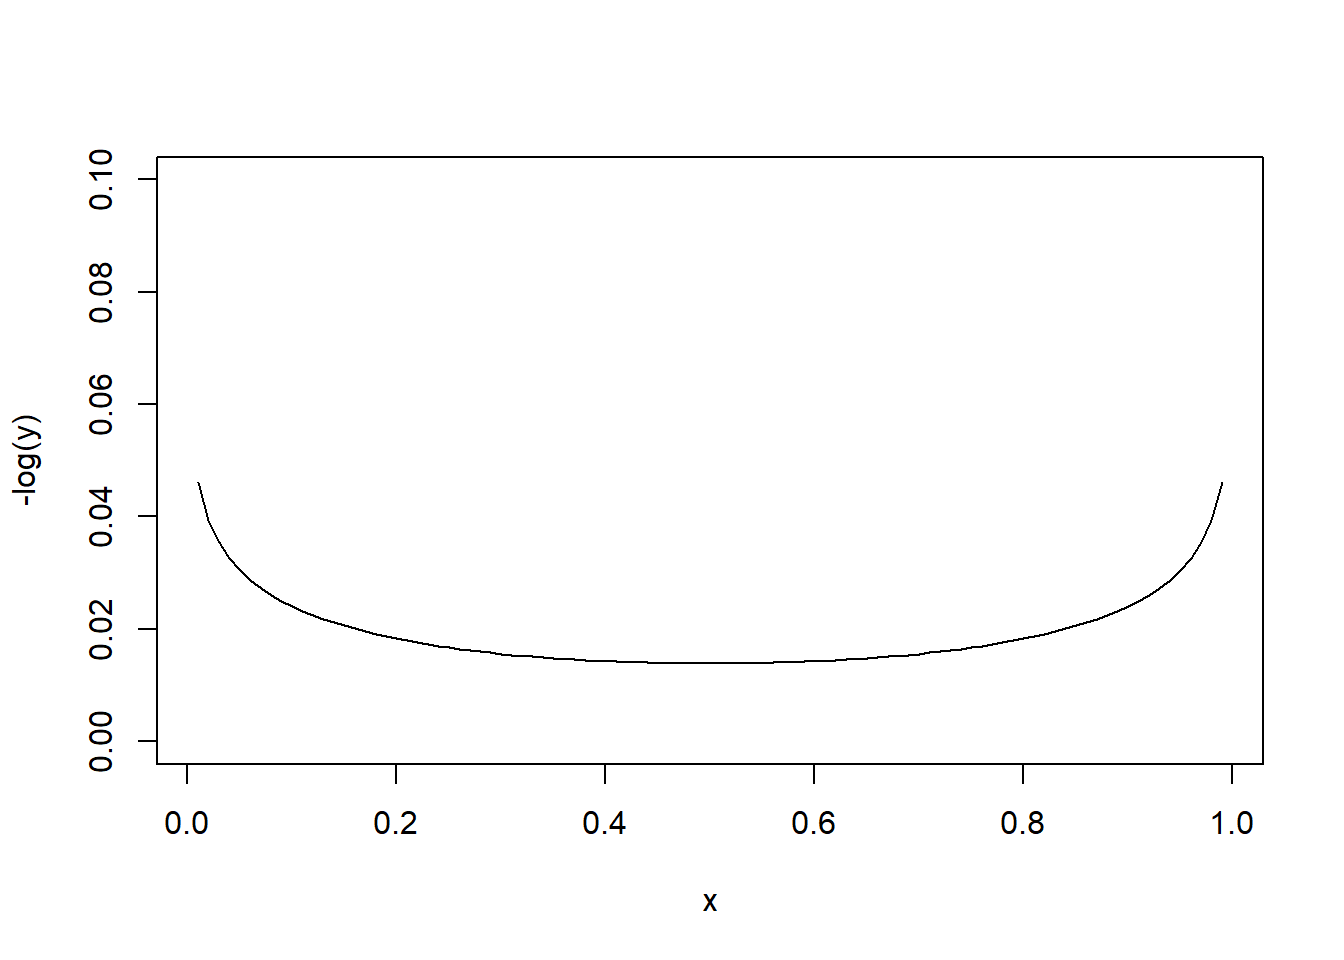 Beta prior for aiding convergence with constants removed where x is the parameter and y is the prior density evaluated at x.